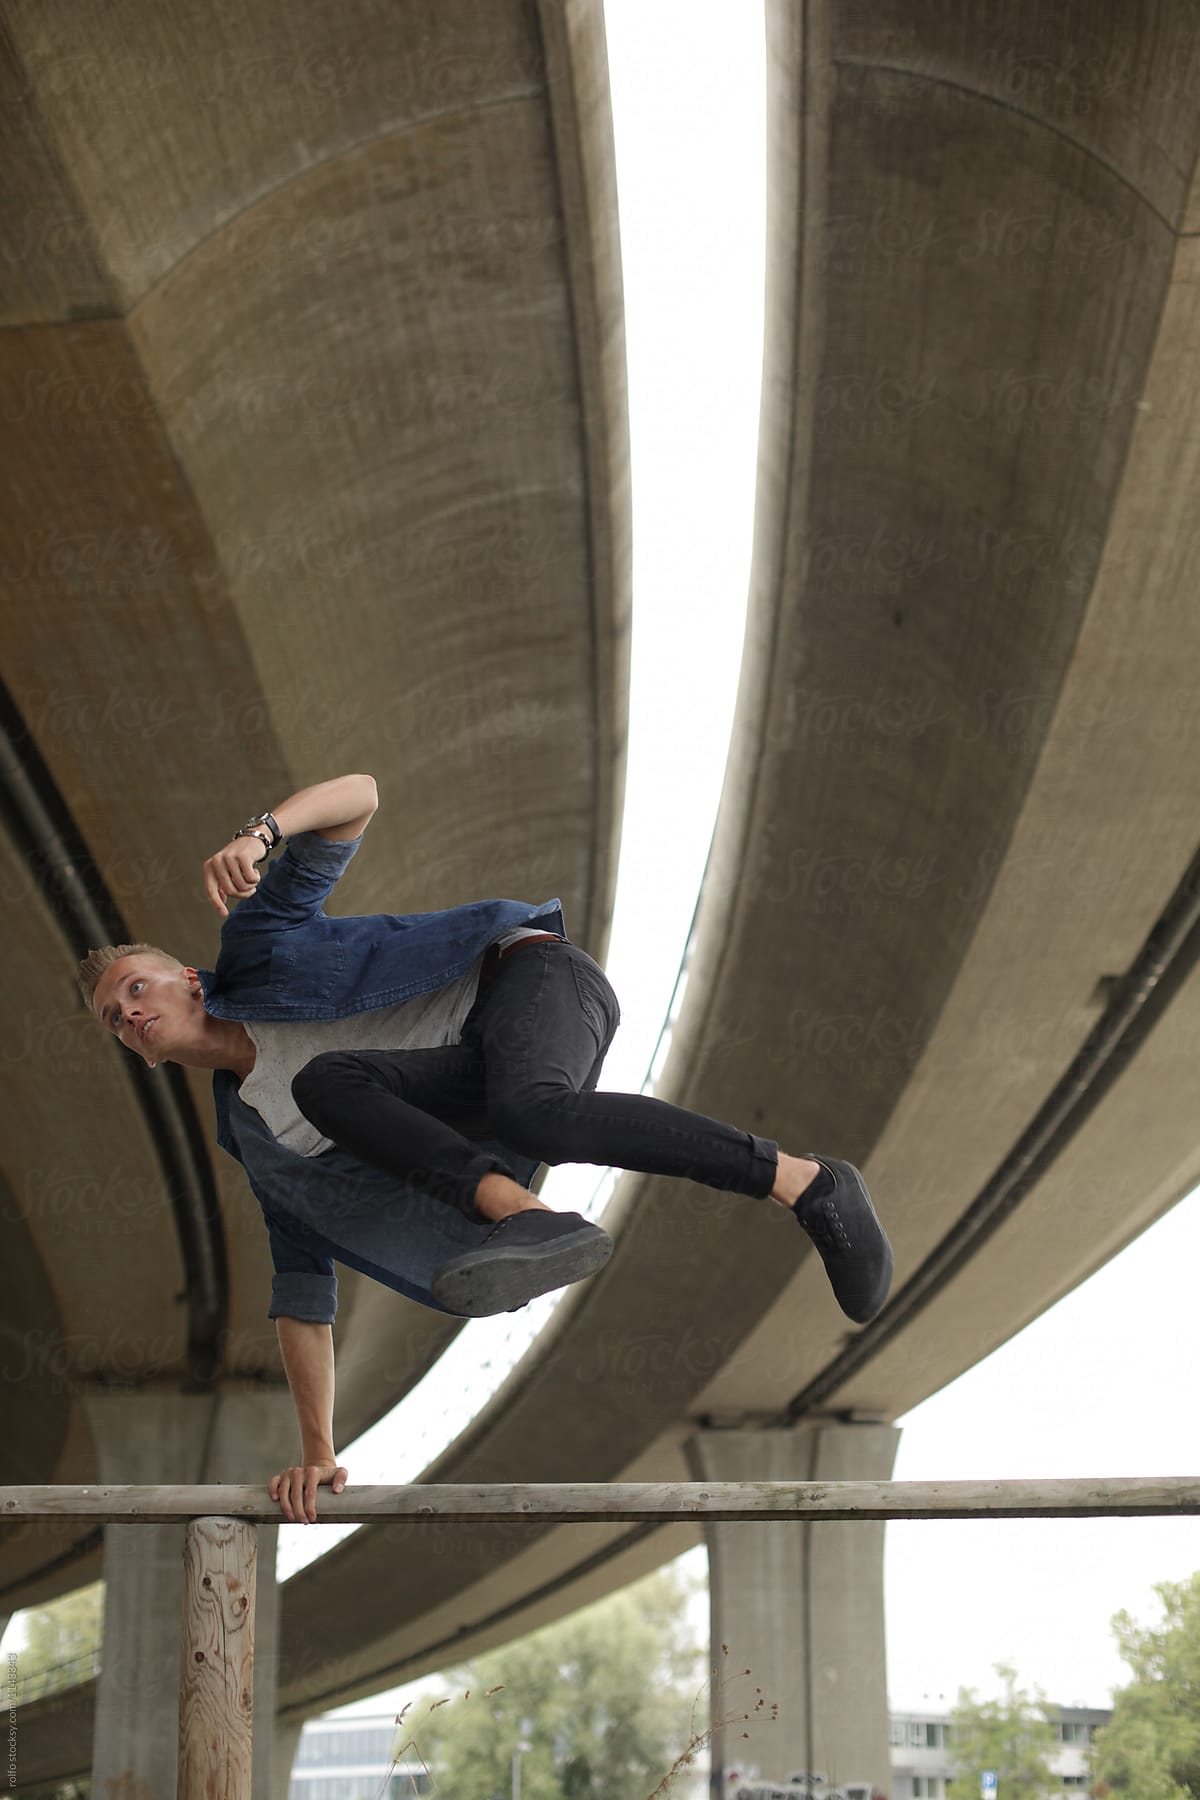 Young man jumping over wooden railing under motorway